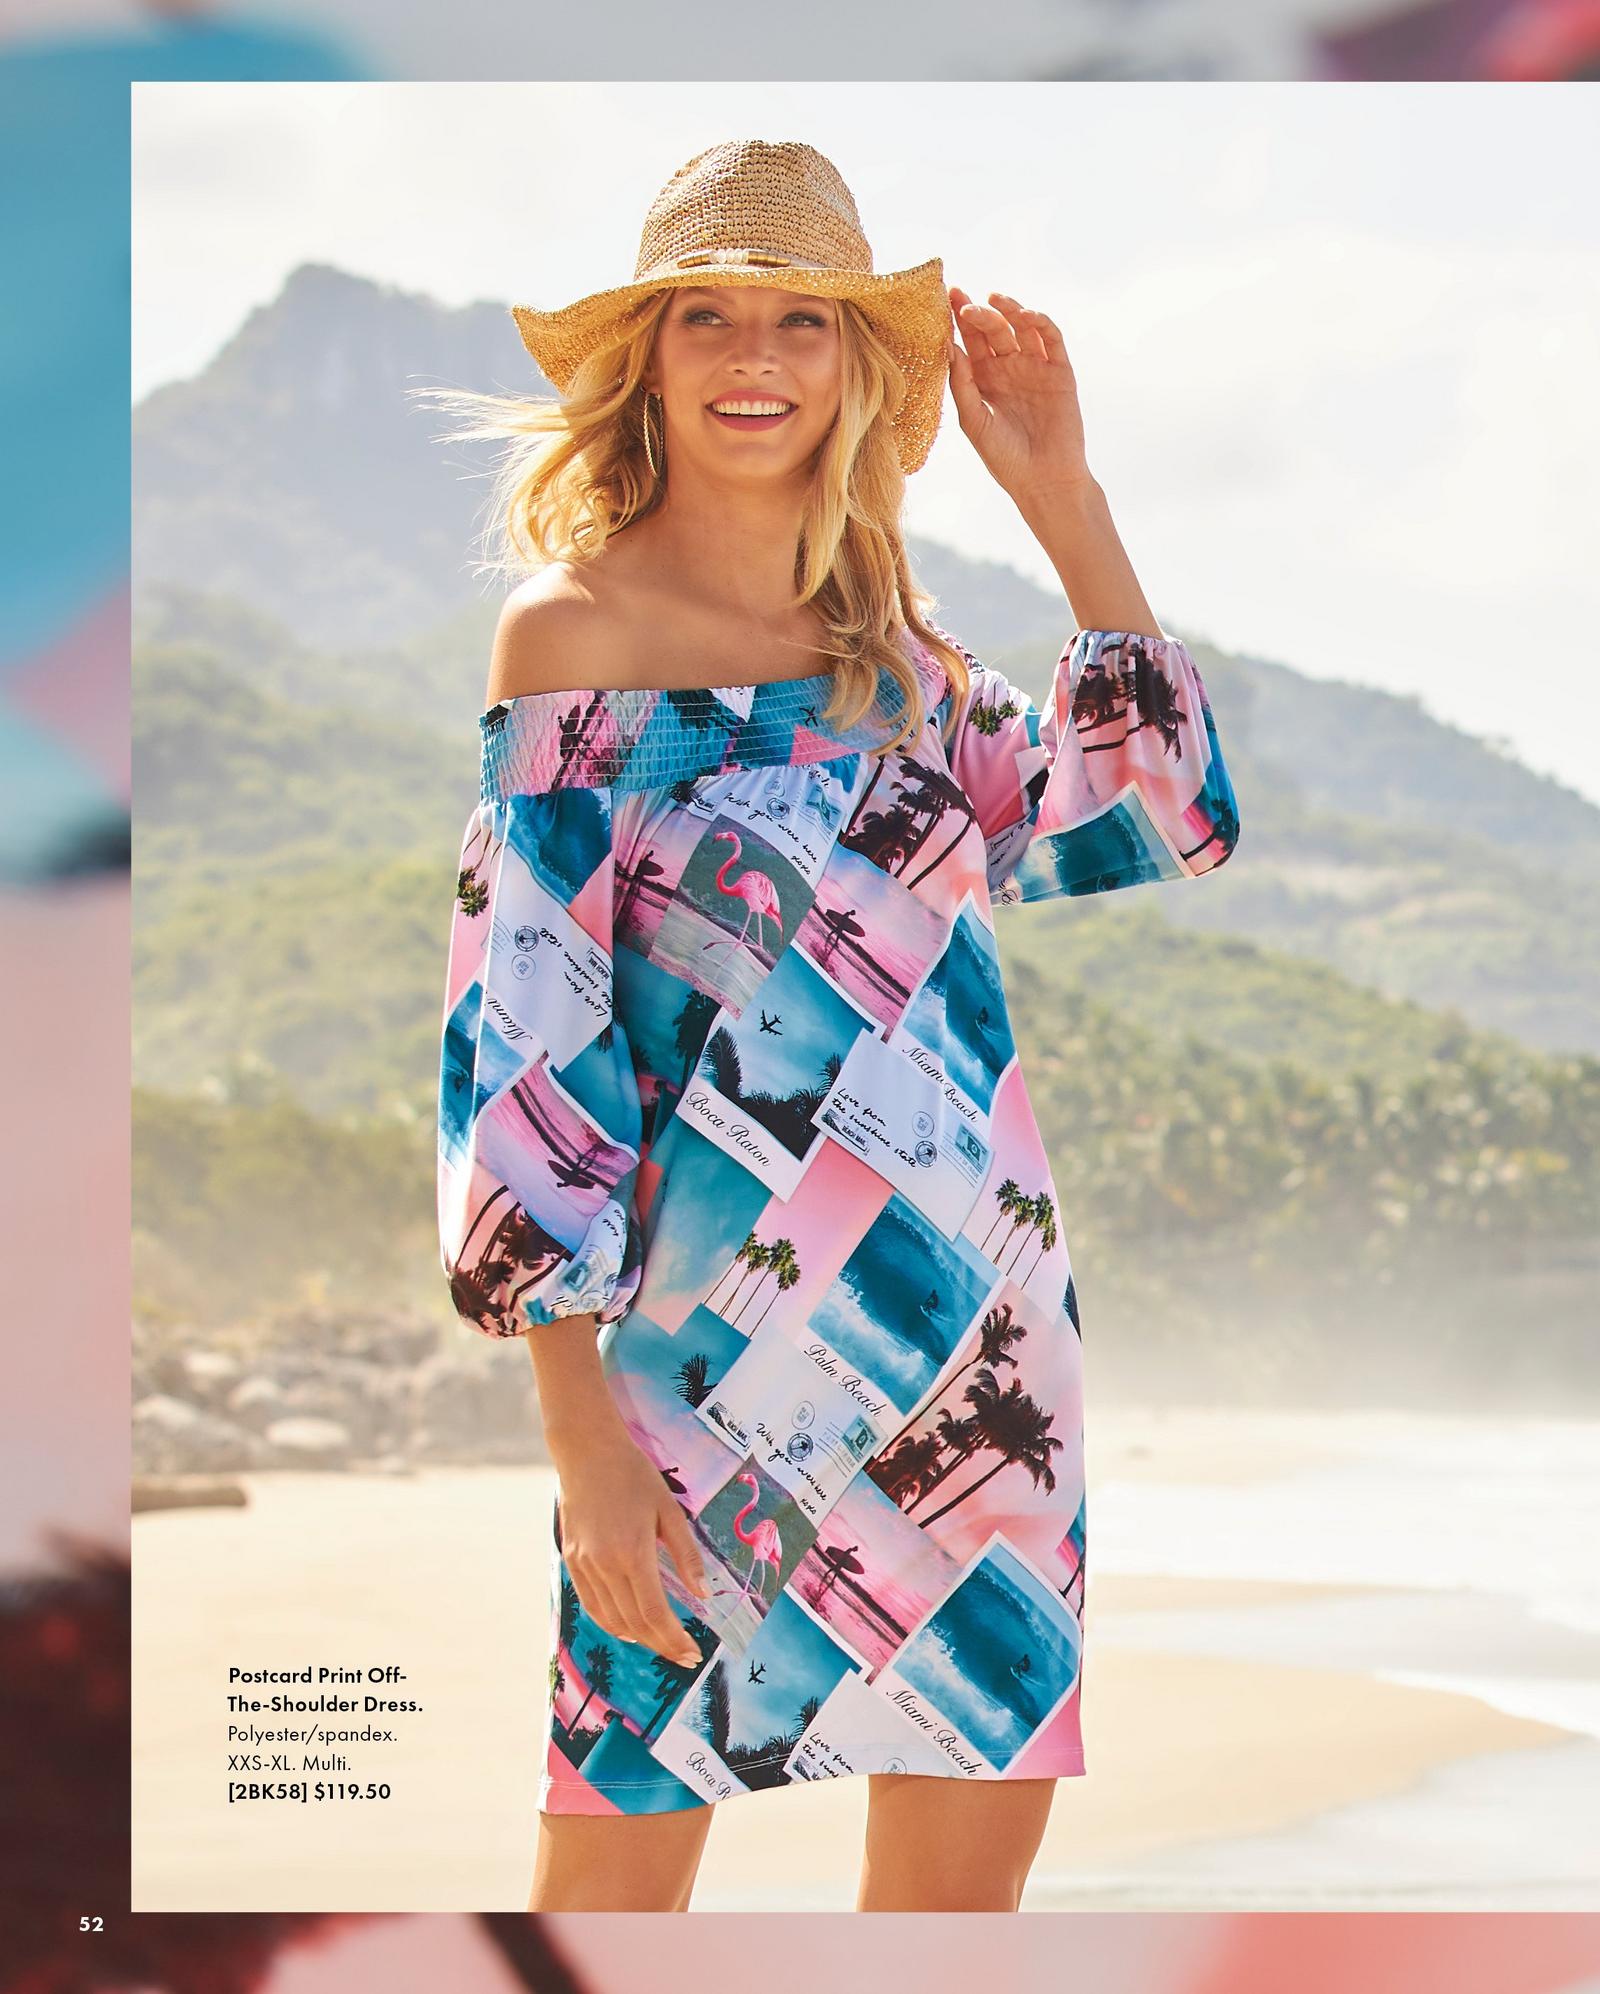 model wearing a multicolored postcard print off-the-shoulder dress and cowboy hat.